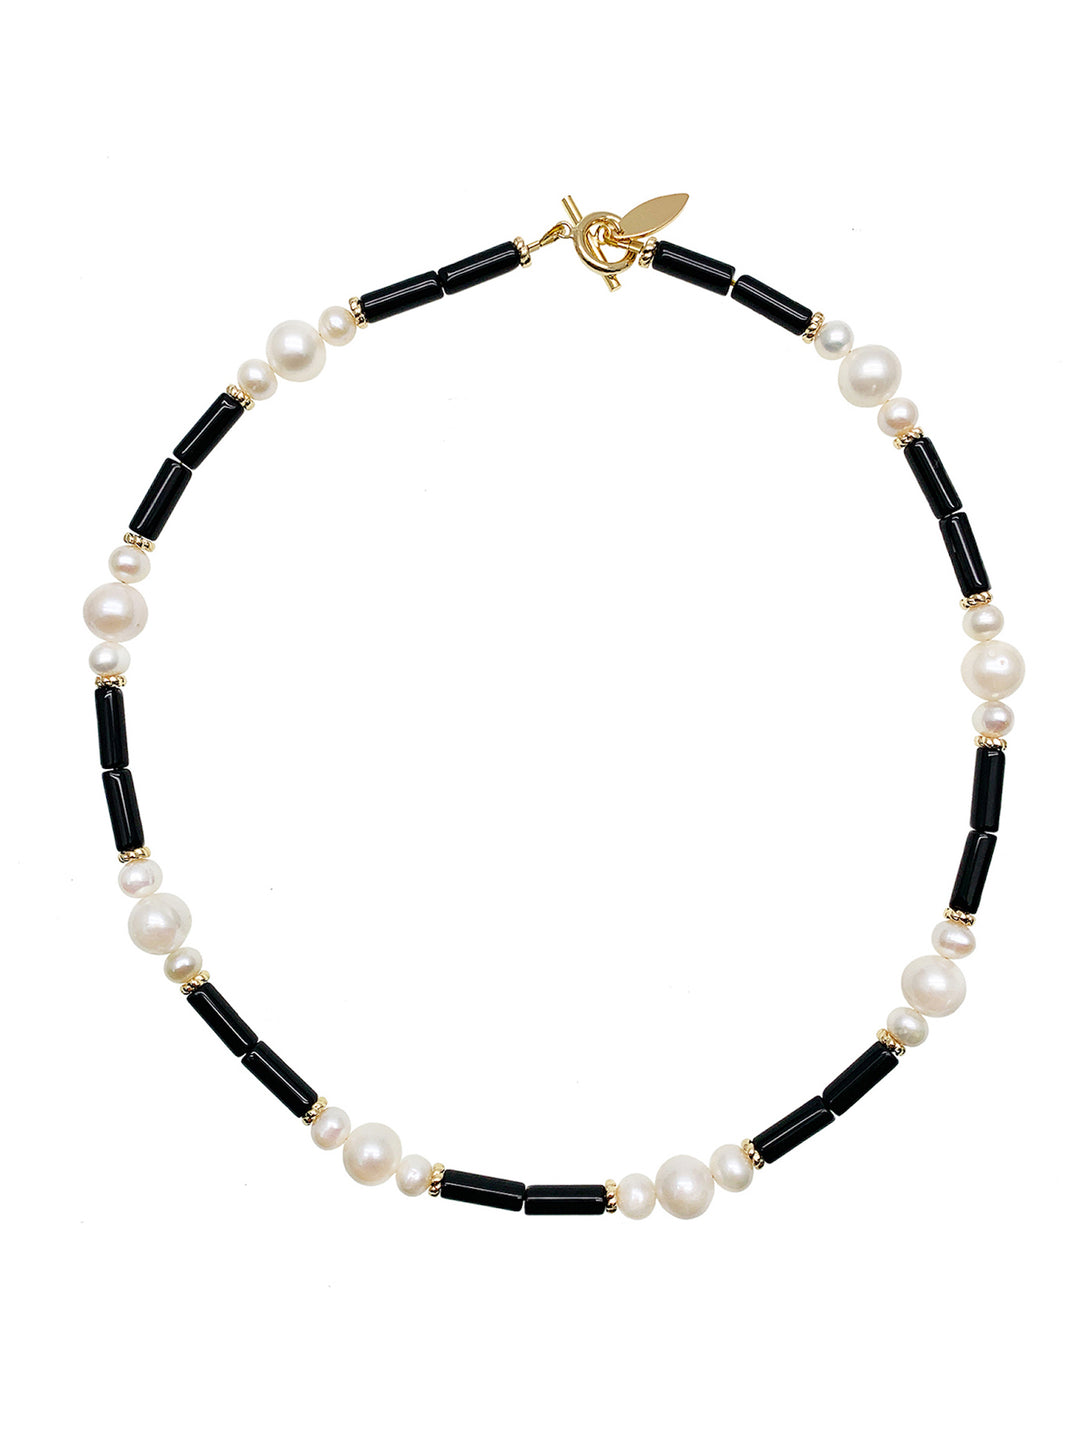 Tube Black Agate With White Pearls Short Necklace HN041 - FARRA